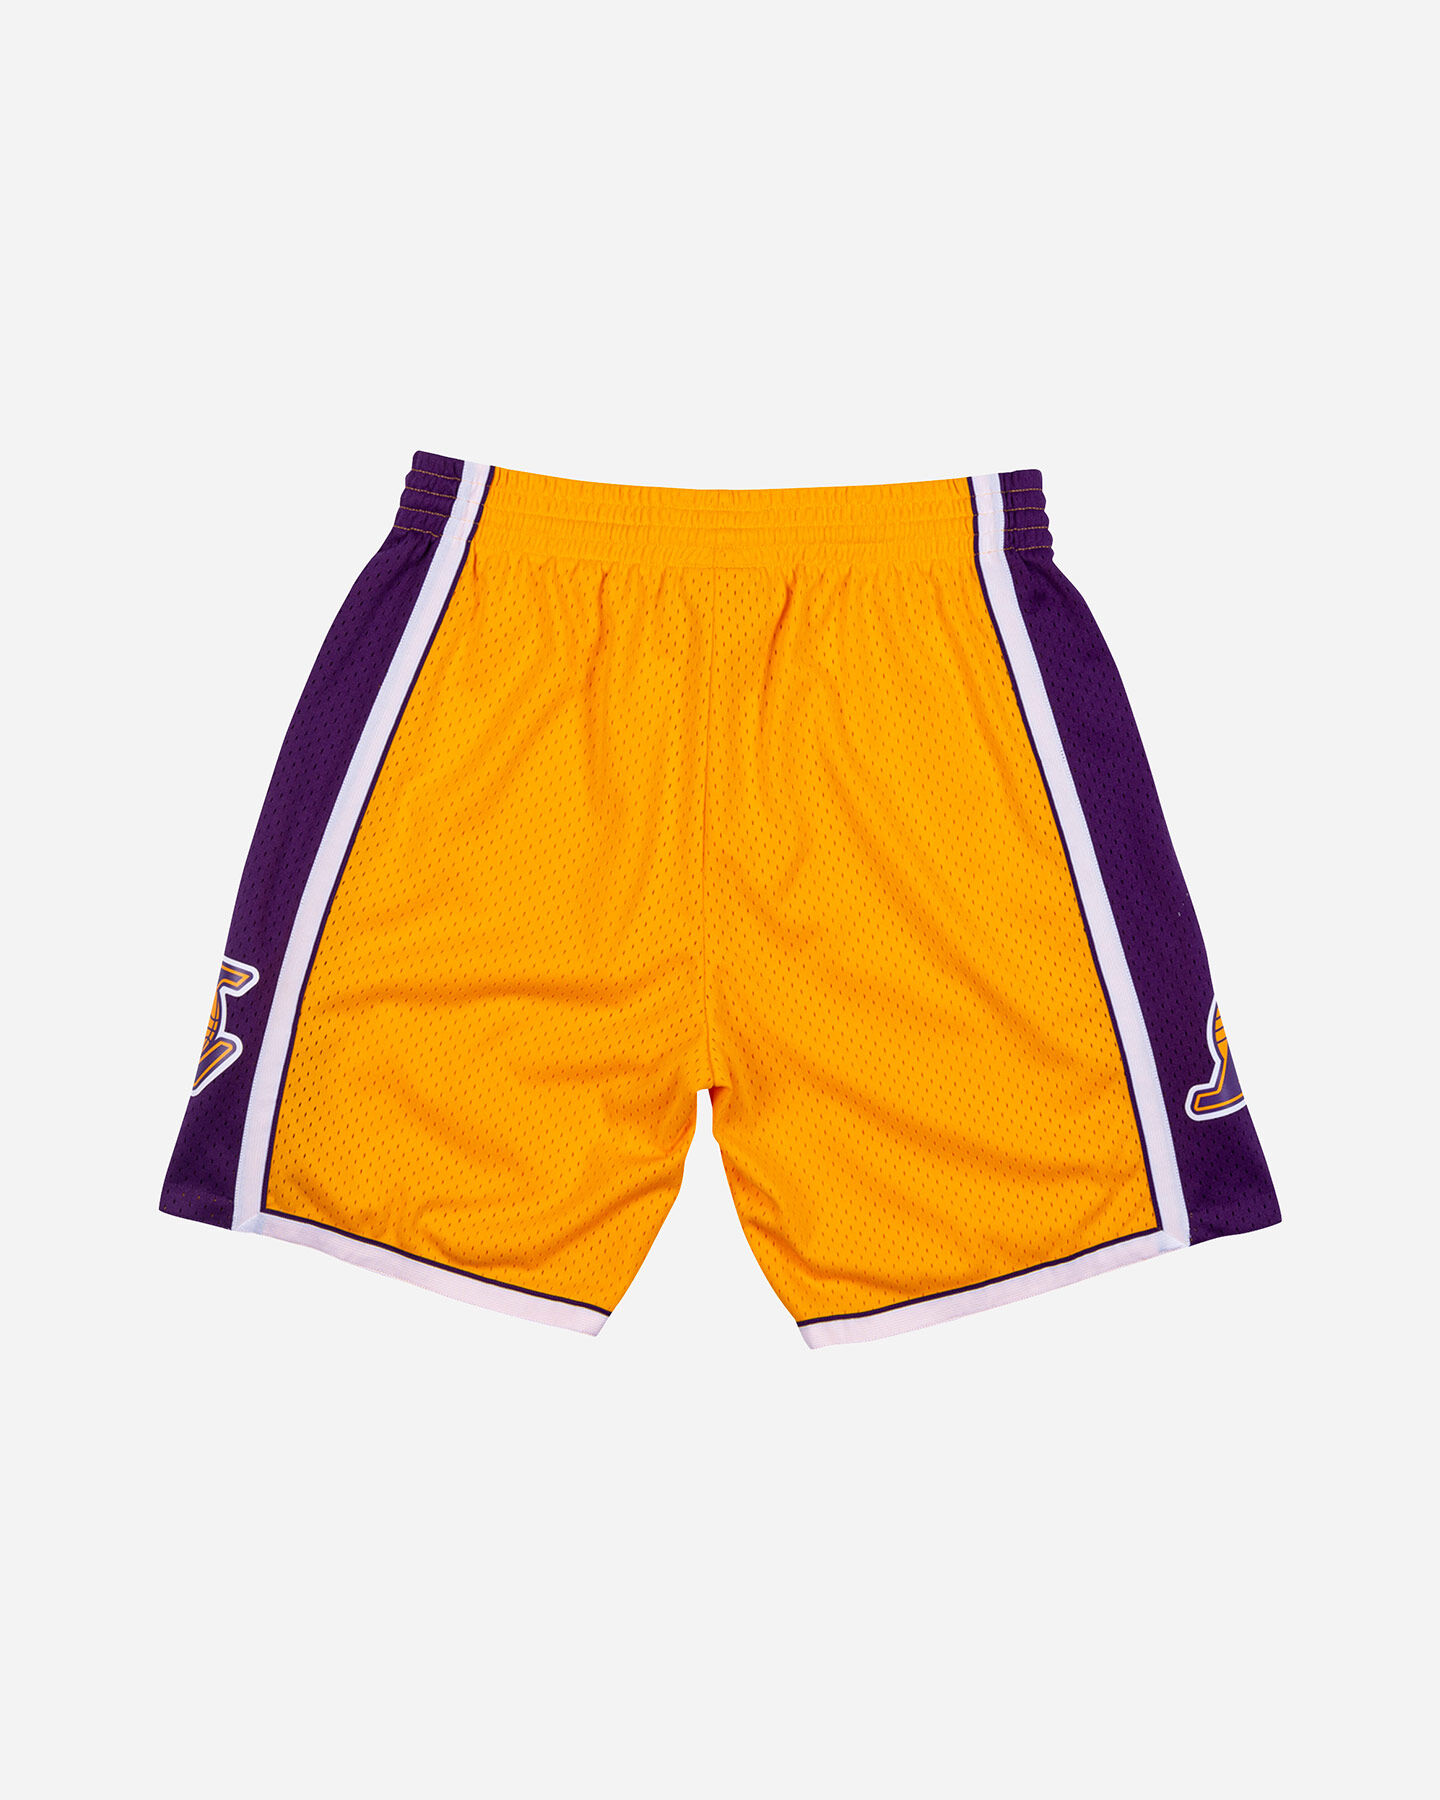  Pantaloncini basket MITCHELL&NESS NBA LOS ANGELES LAKERS '09 ICON M S4099981|001|S scatto 2